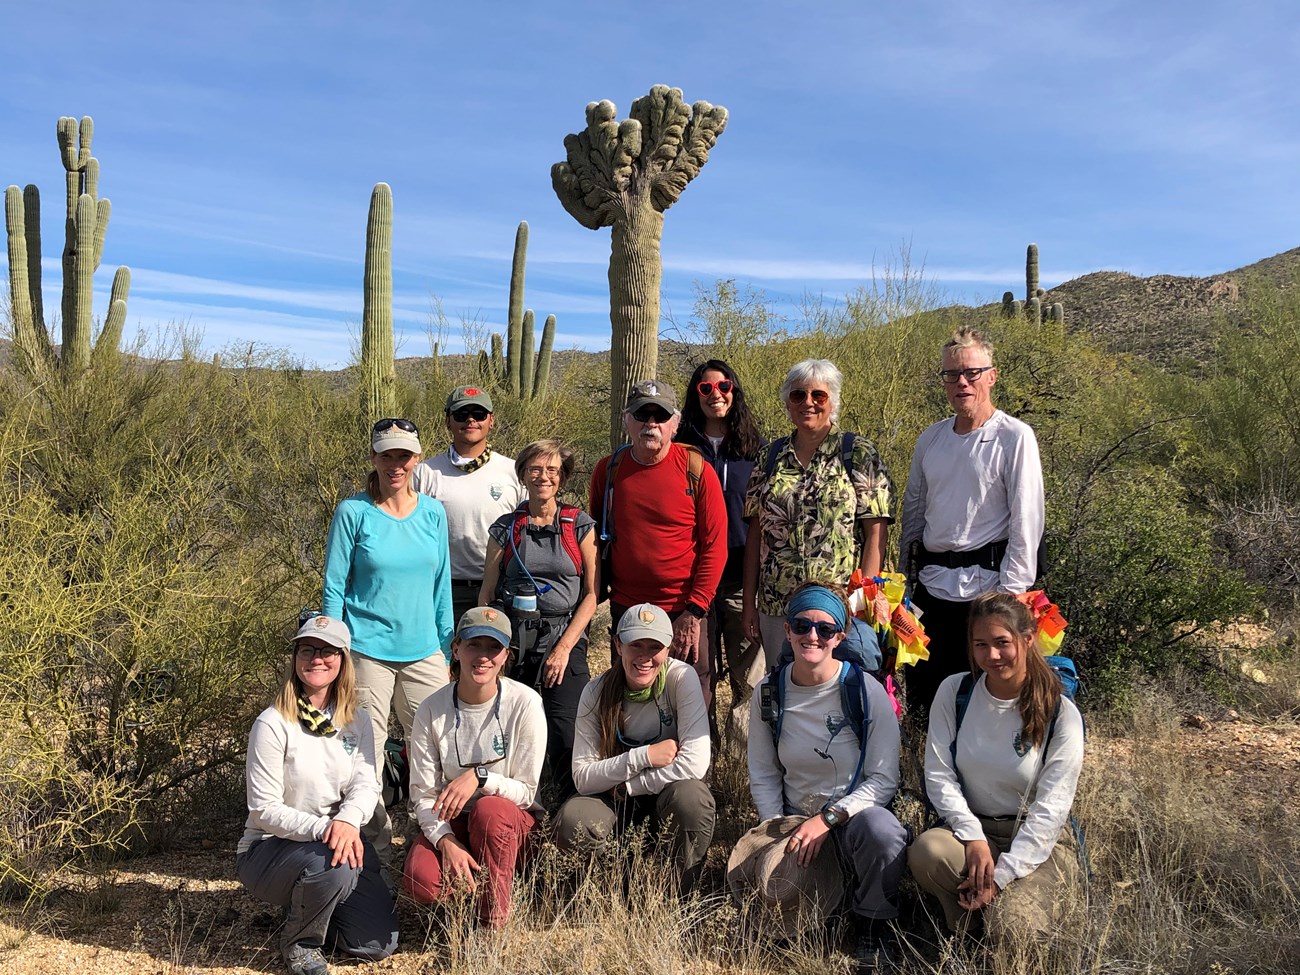 Group photo after the census. Behind them is a crested saguaro.